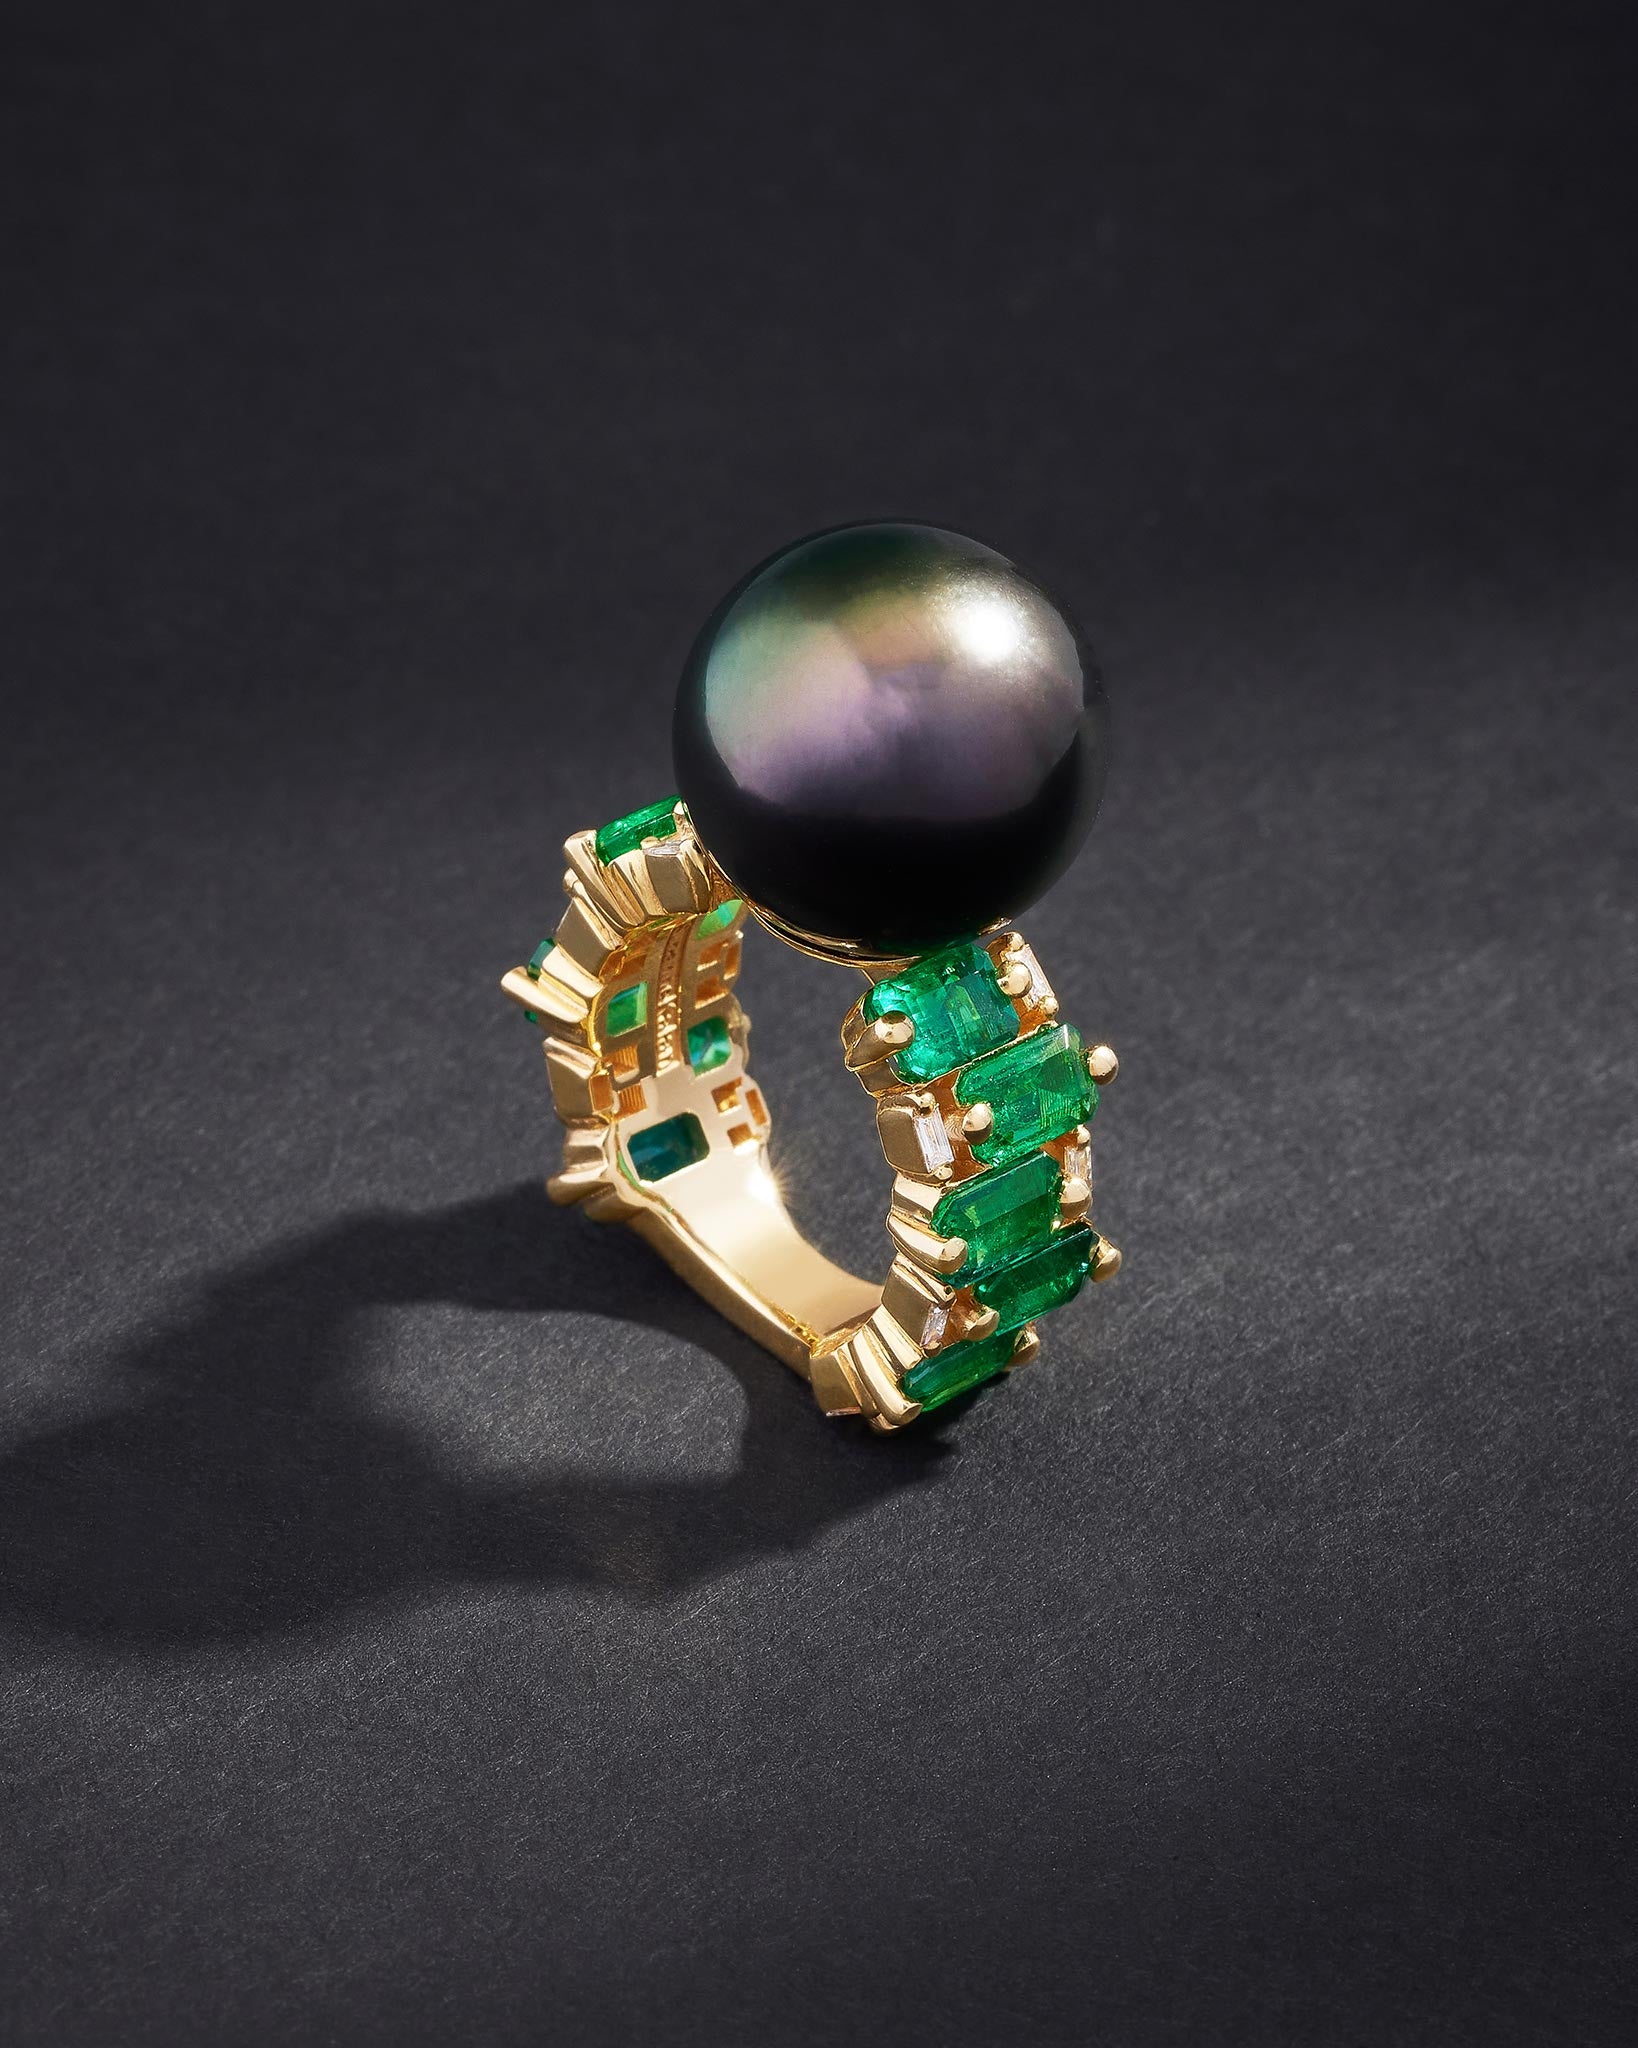 Suzanne Kalan One of a Kind Black South Sea Pearl Ring with Emerald-Cut Emeralds in 18k yellow gold